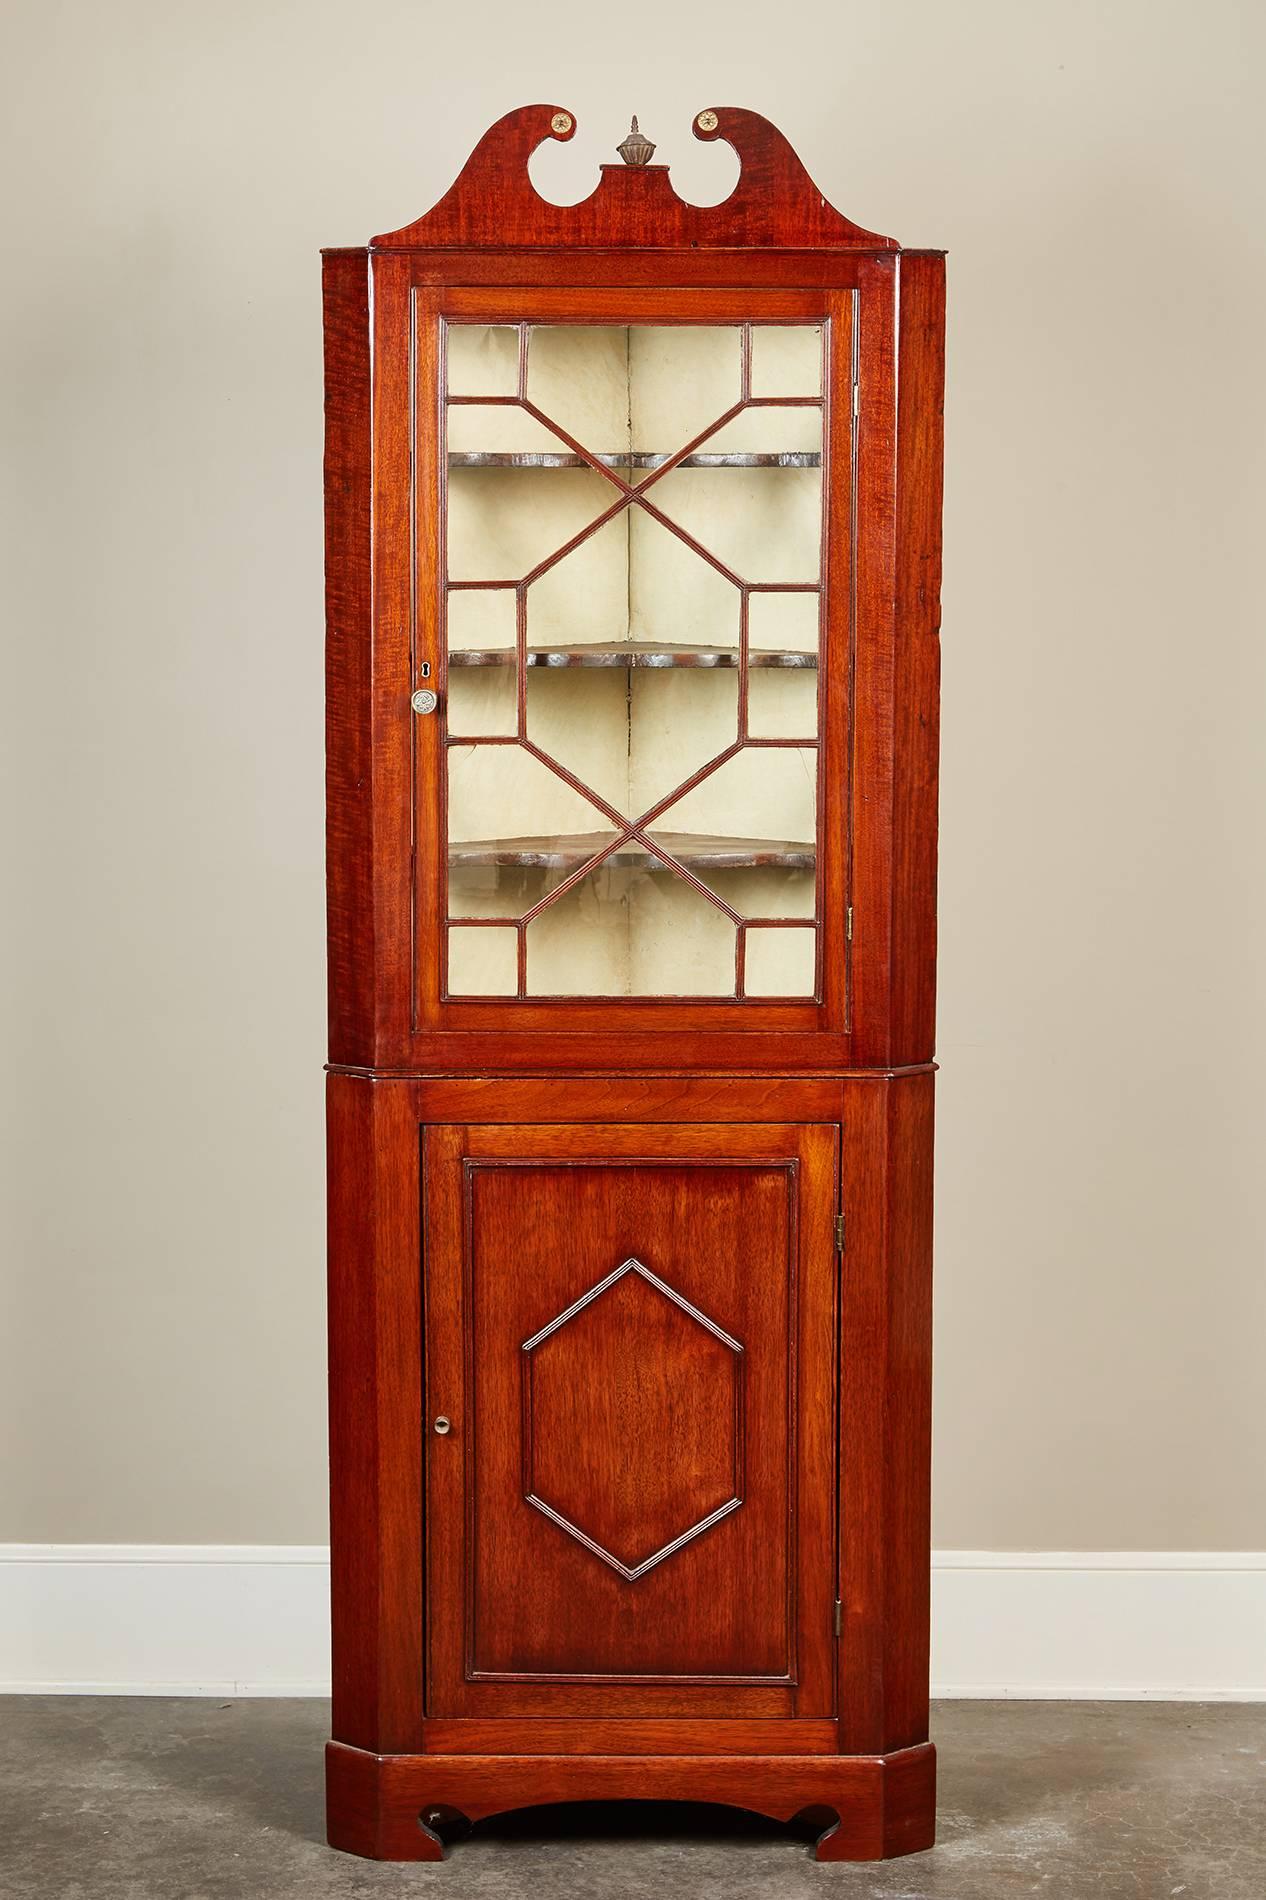 A 19th century Edwardian mahogany corner cabinet, with a swan pediment and a centered finial standing on bracket feet. The upper portion has an astragal glazed door enclosing three stationary shelving units, while the lower portion has an exterior